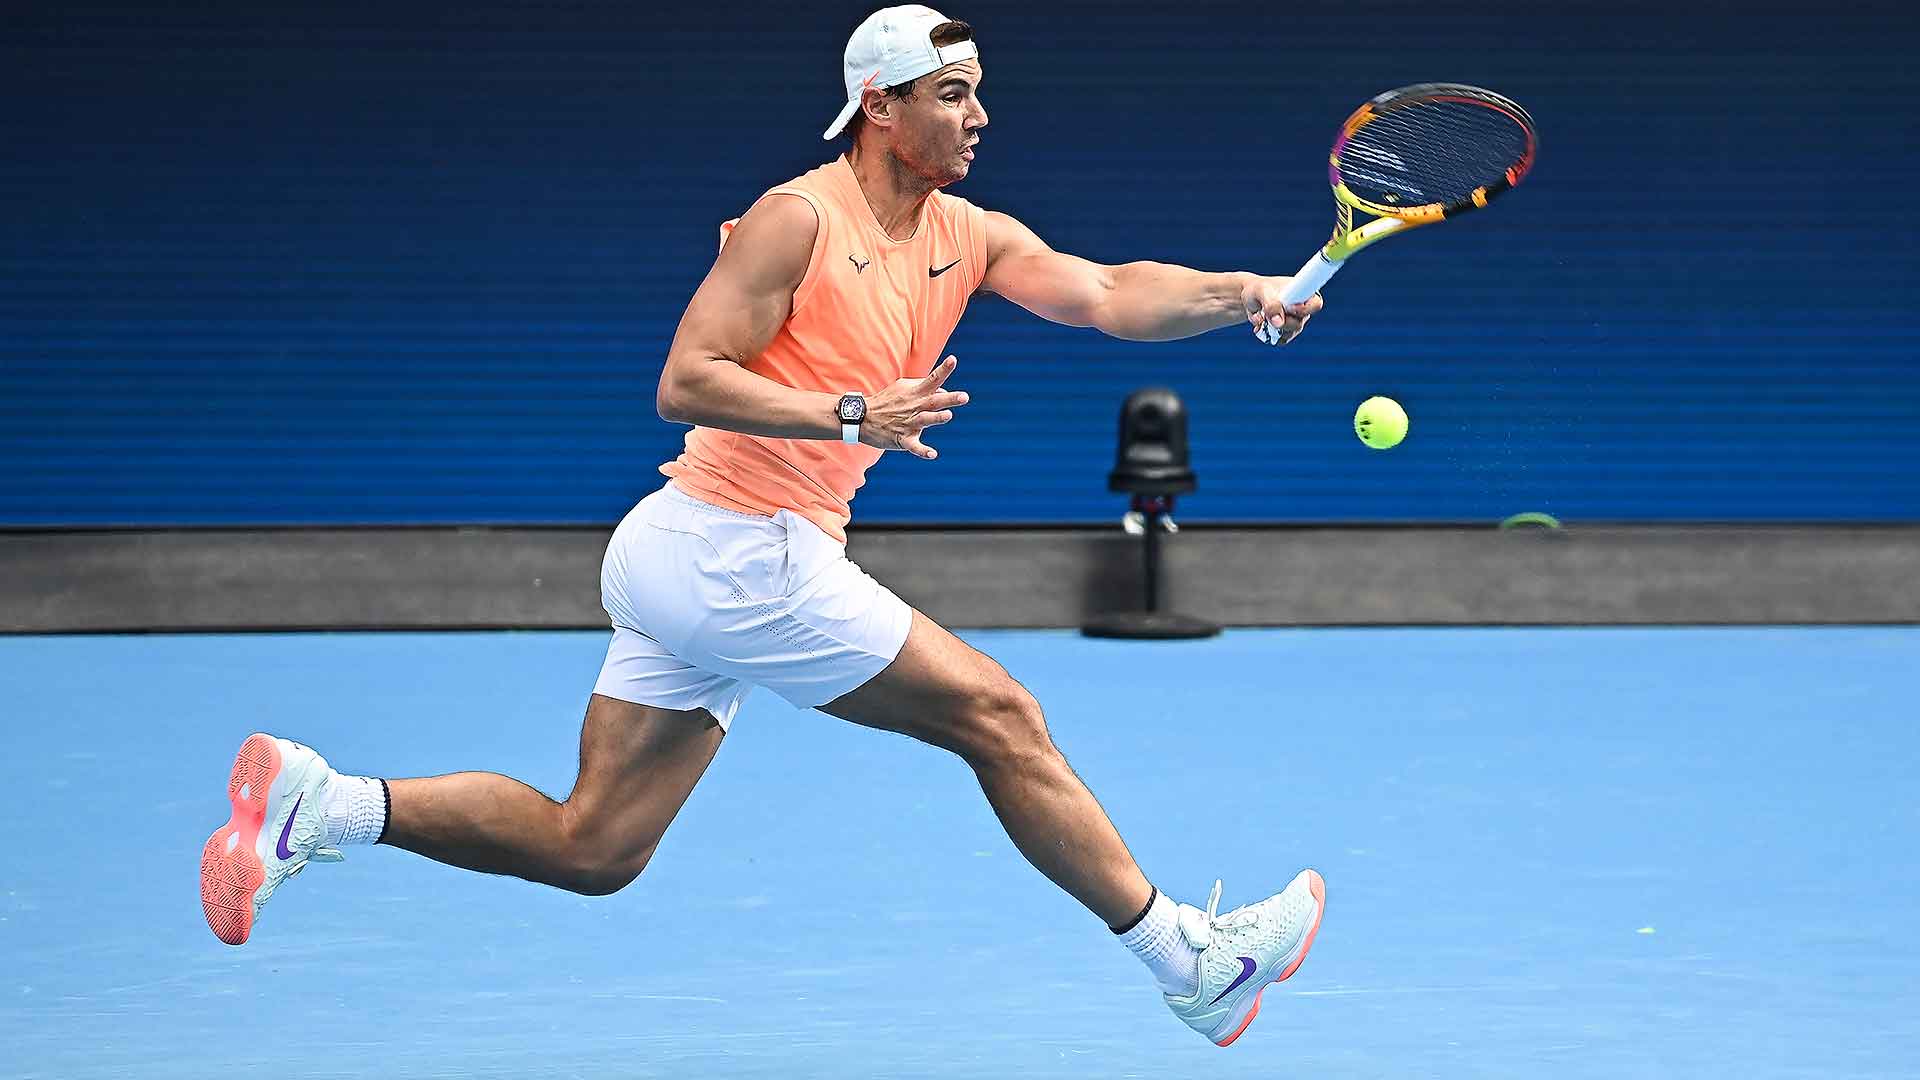 Rafael Nadal Learns Australian Open Draw Aims For 21st Major Title -2021 Preview | ATP Tour | Tennis